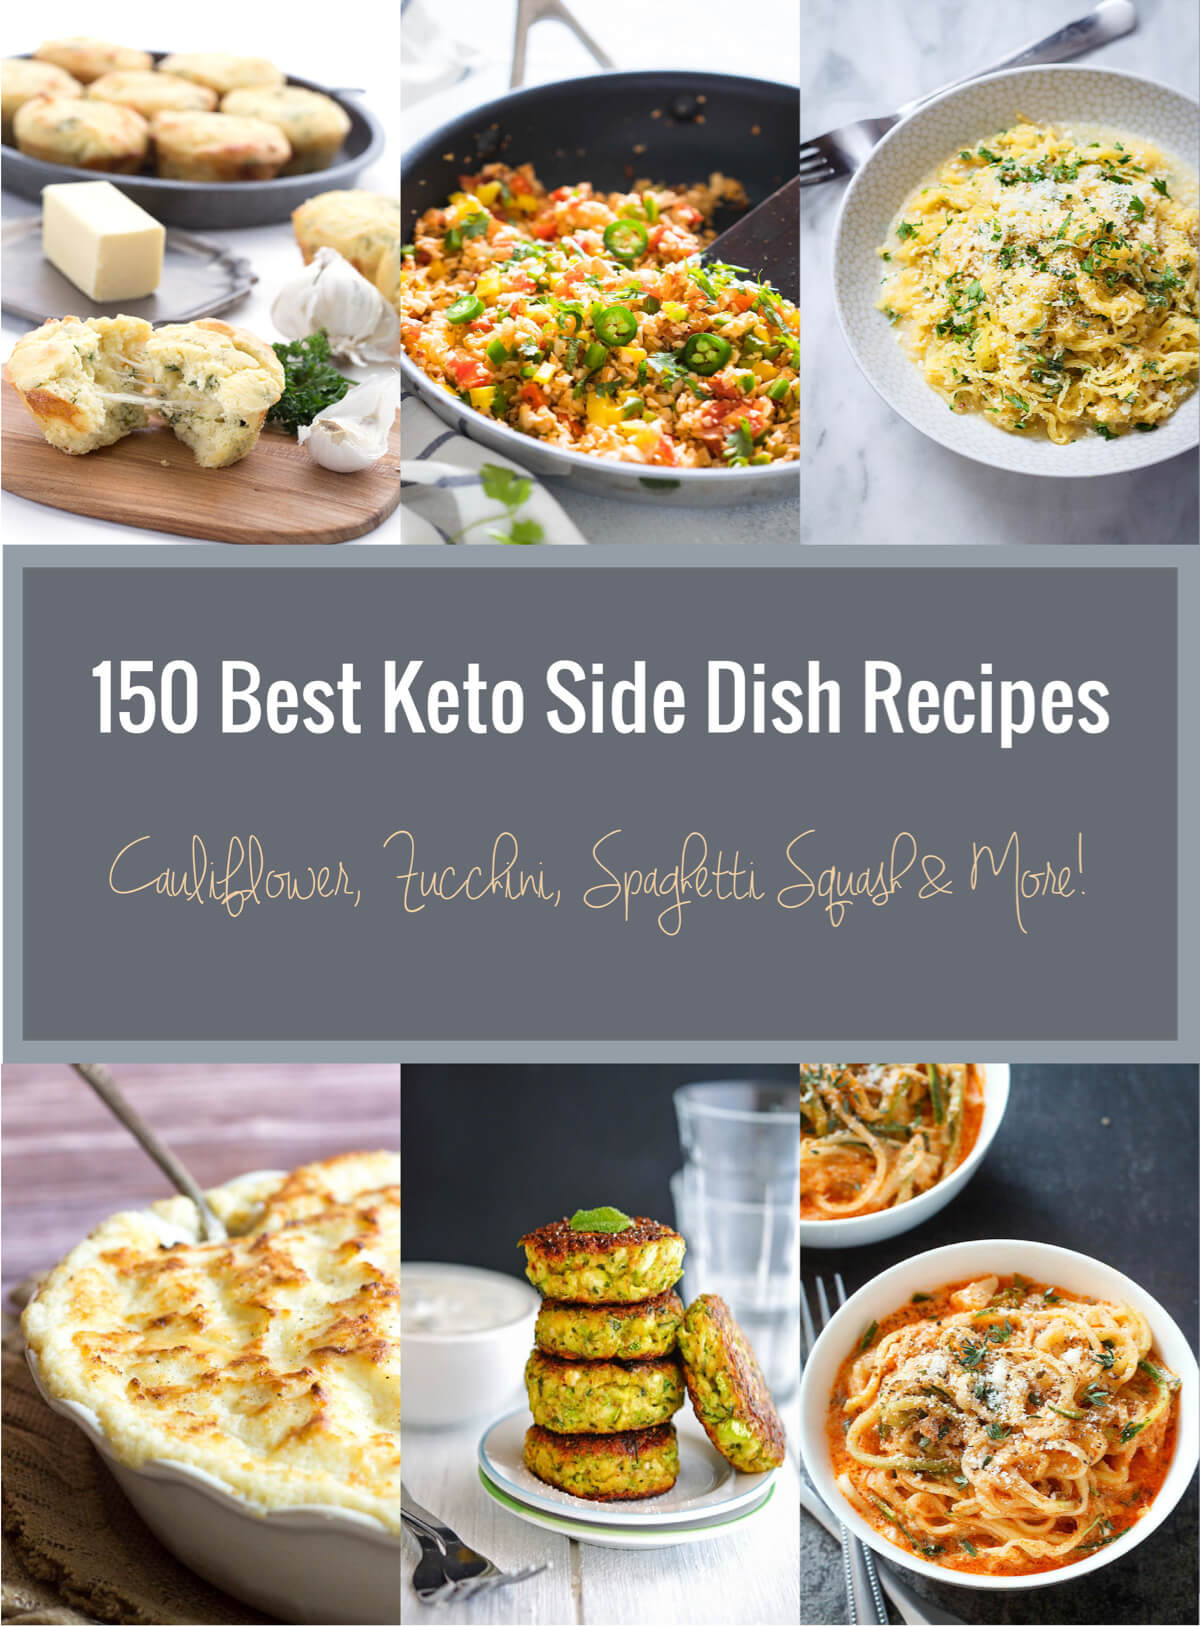 Low Carb Side Dishes
 150 Best Keto Side Dish Recipes Low Carb